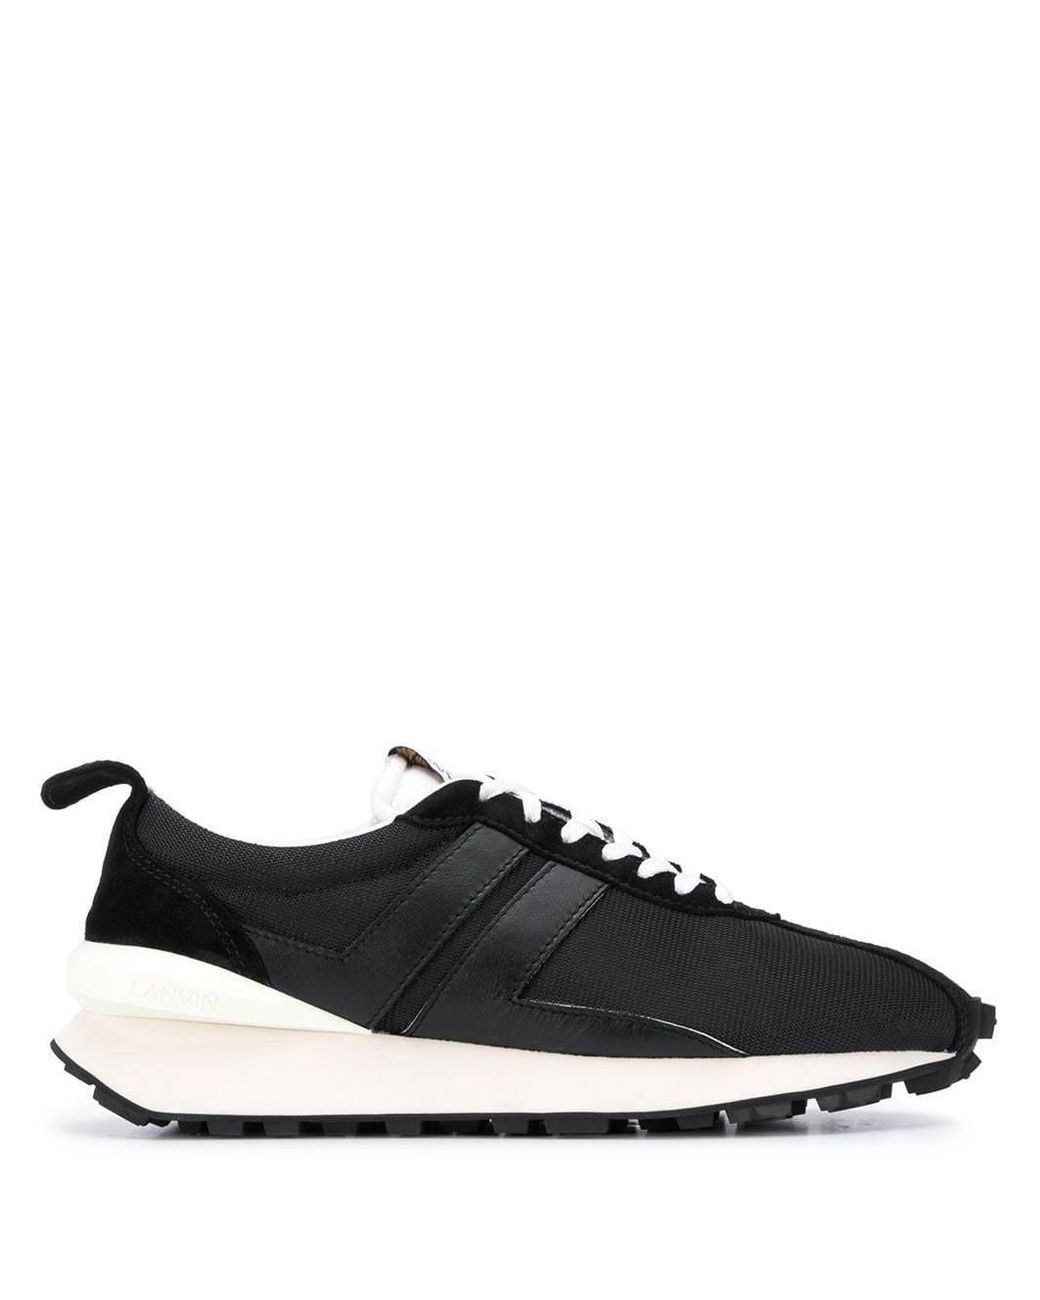 Lanvin Synthetic Sneakers Black for Men - Save 32% - Lyst